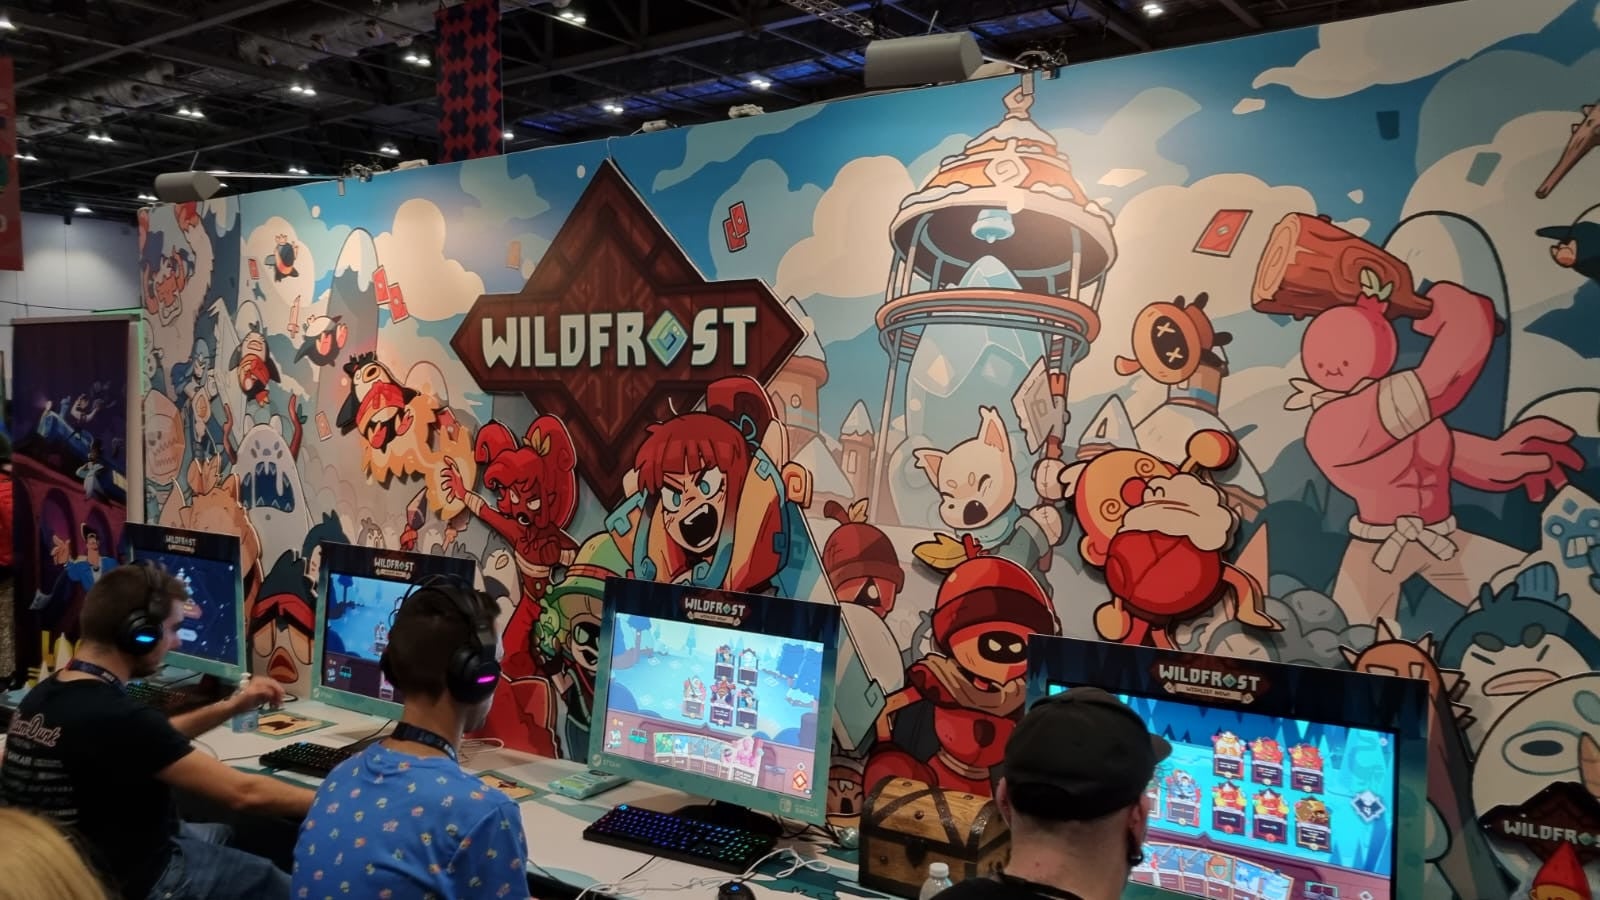 Wildfrost booth at EGX 2022.